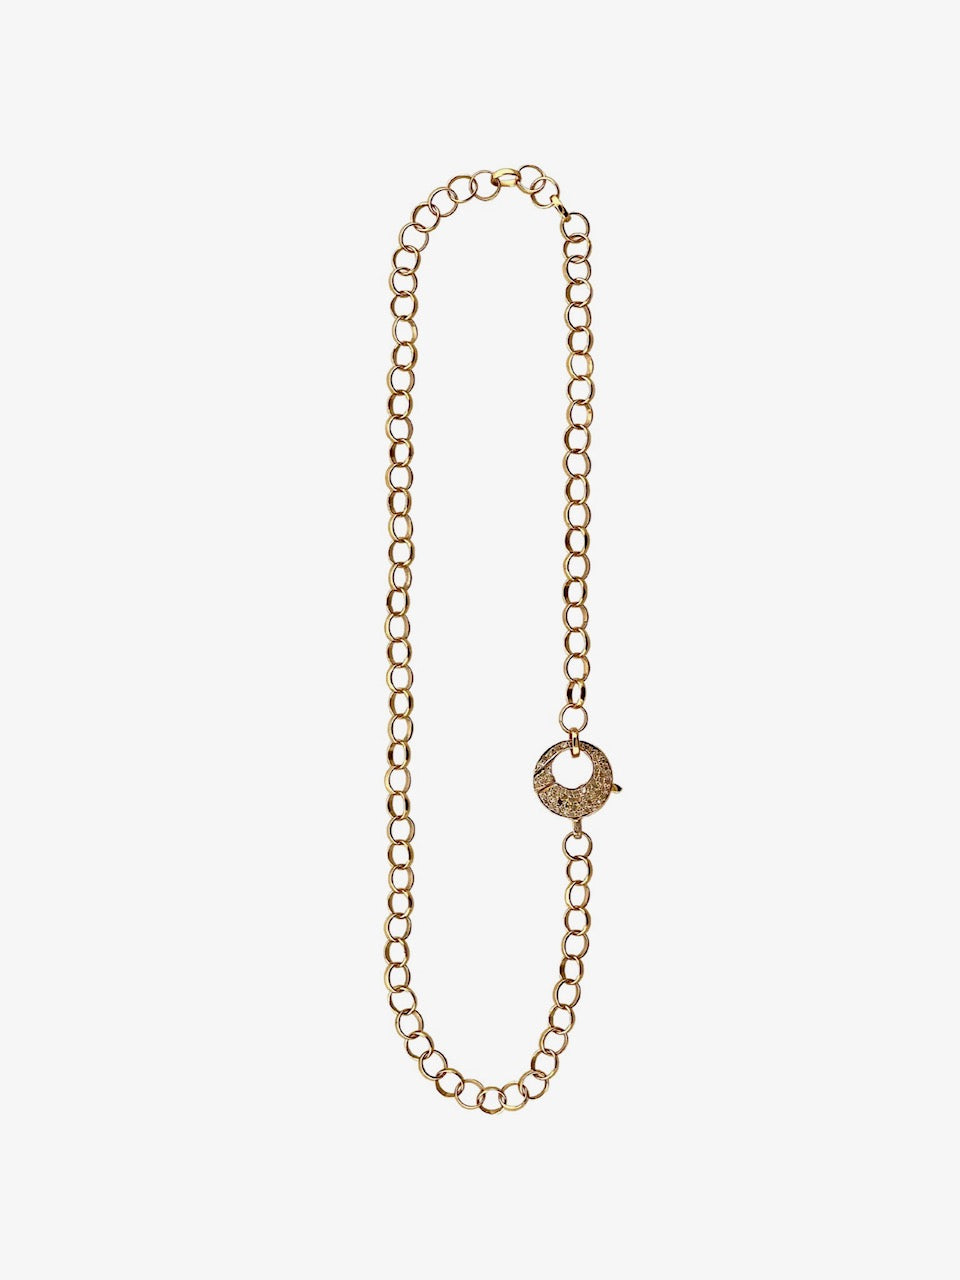 Small Link 22kt Gold over Brass Chain with Pave Diamond Clasp